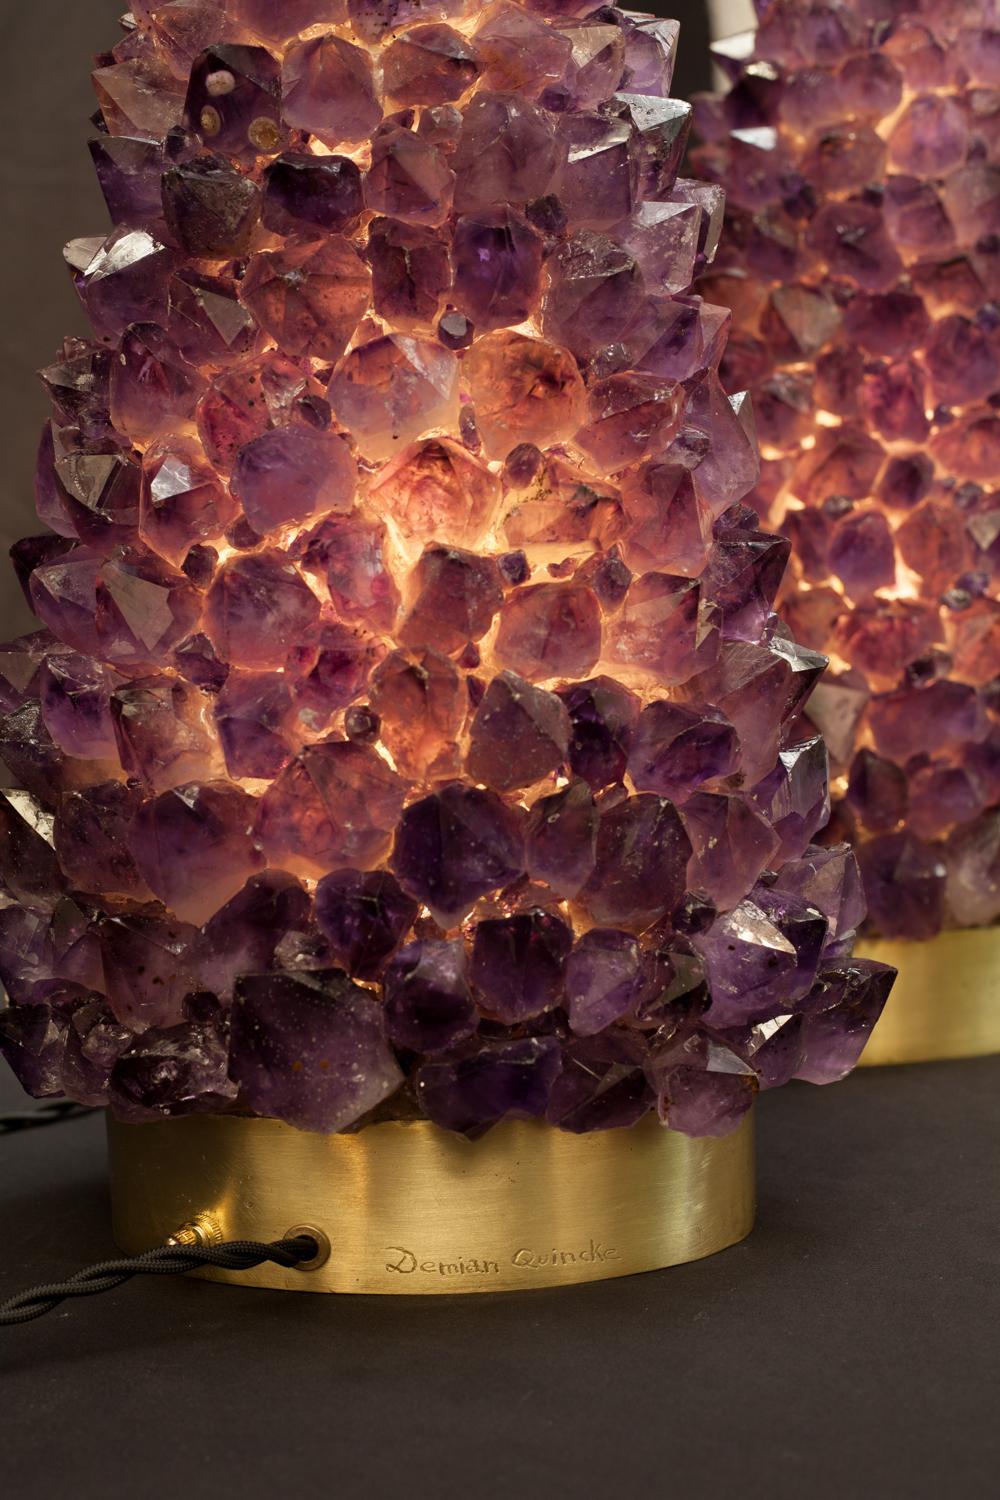 Brazilian Pair of Natural Amethyst Table Lamps, Signed by Demian Quincke For Sale